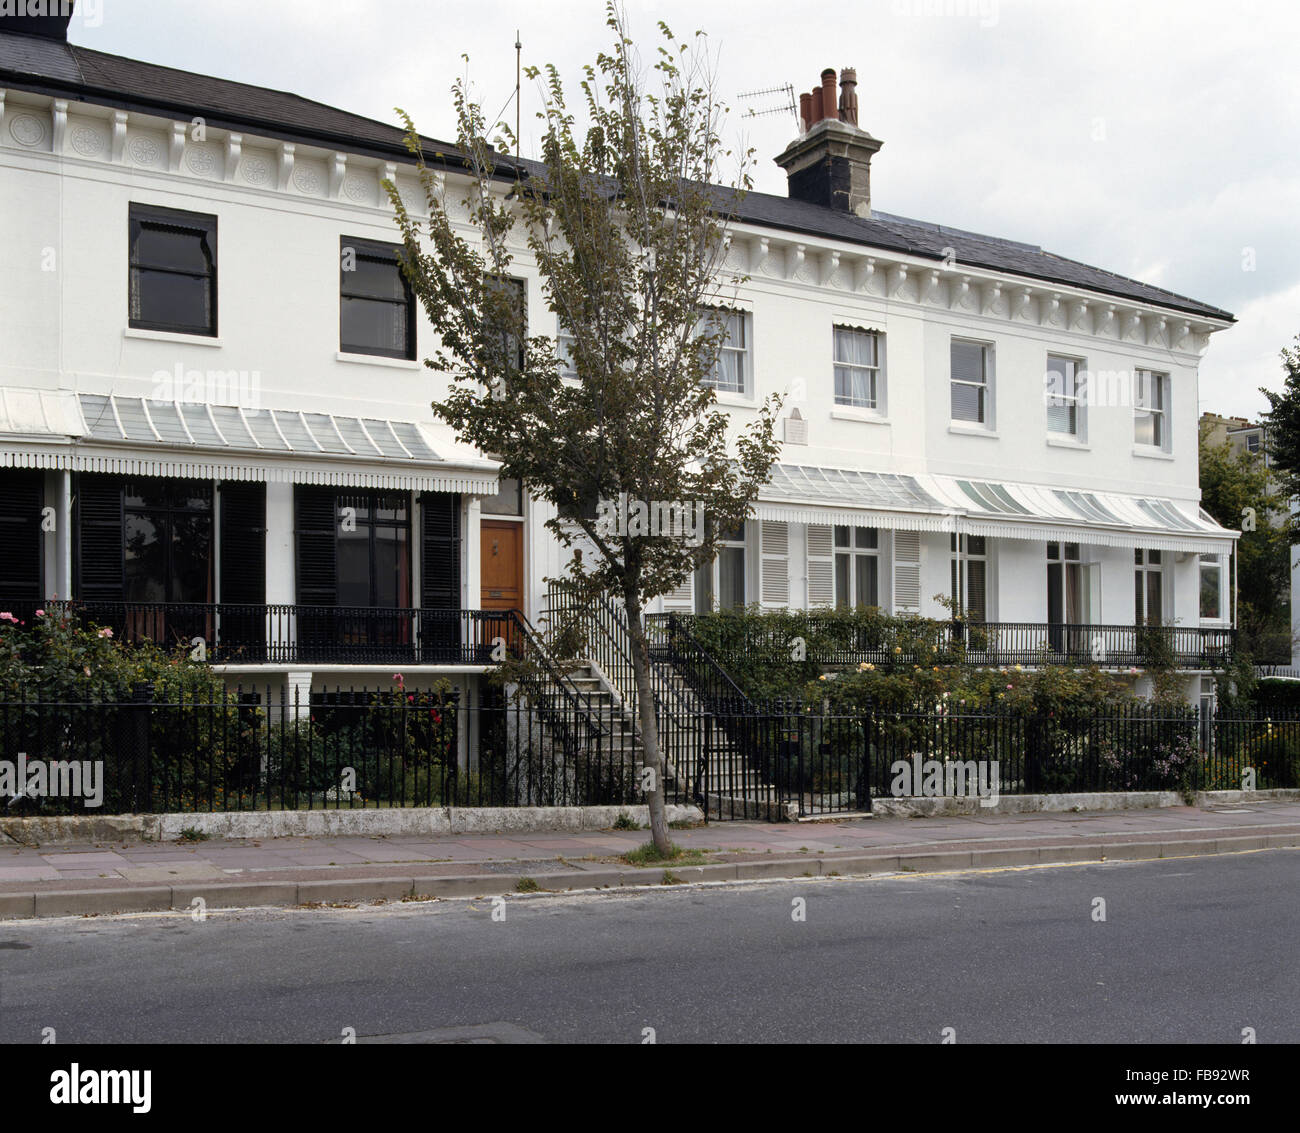 Exterior of a terrace of white Victorian town houses with verandas Stock Photo